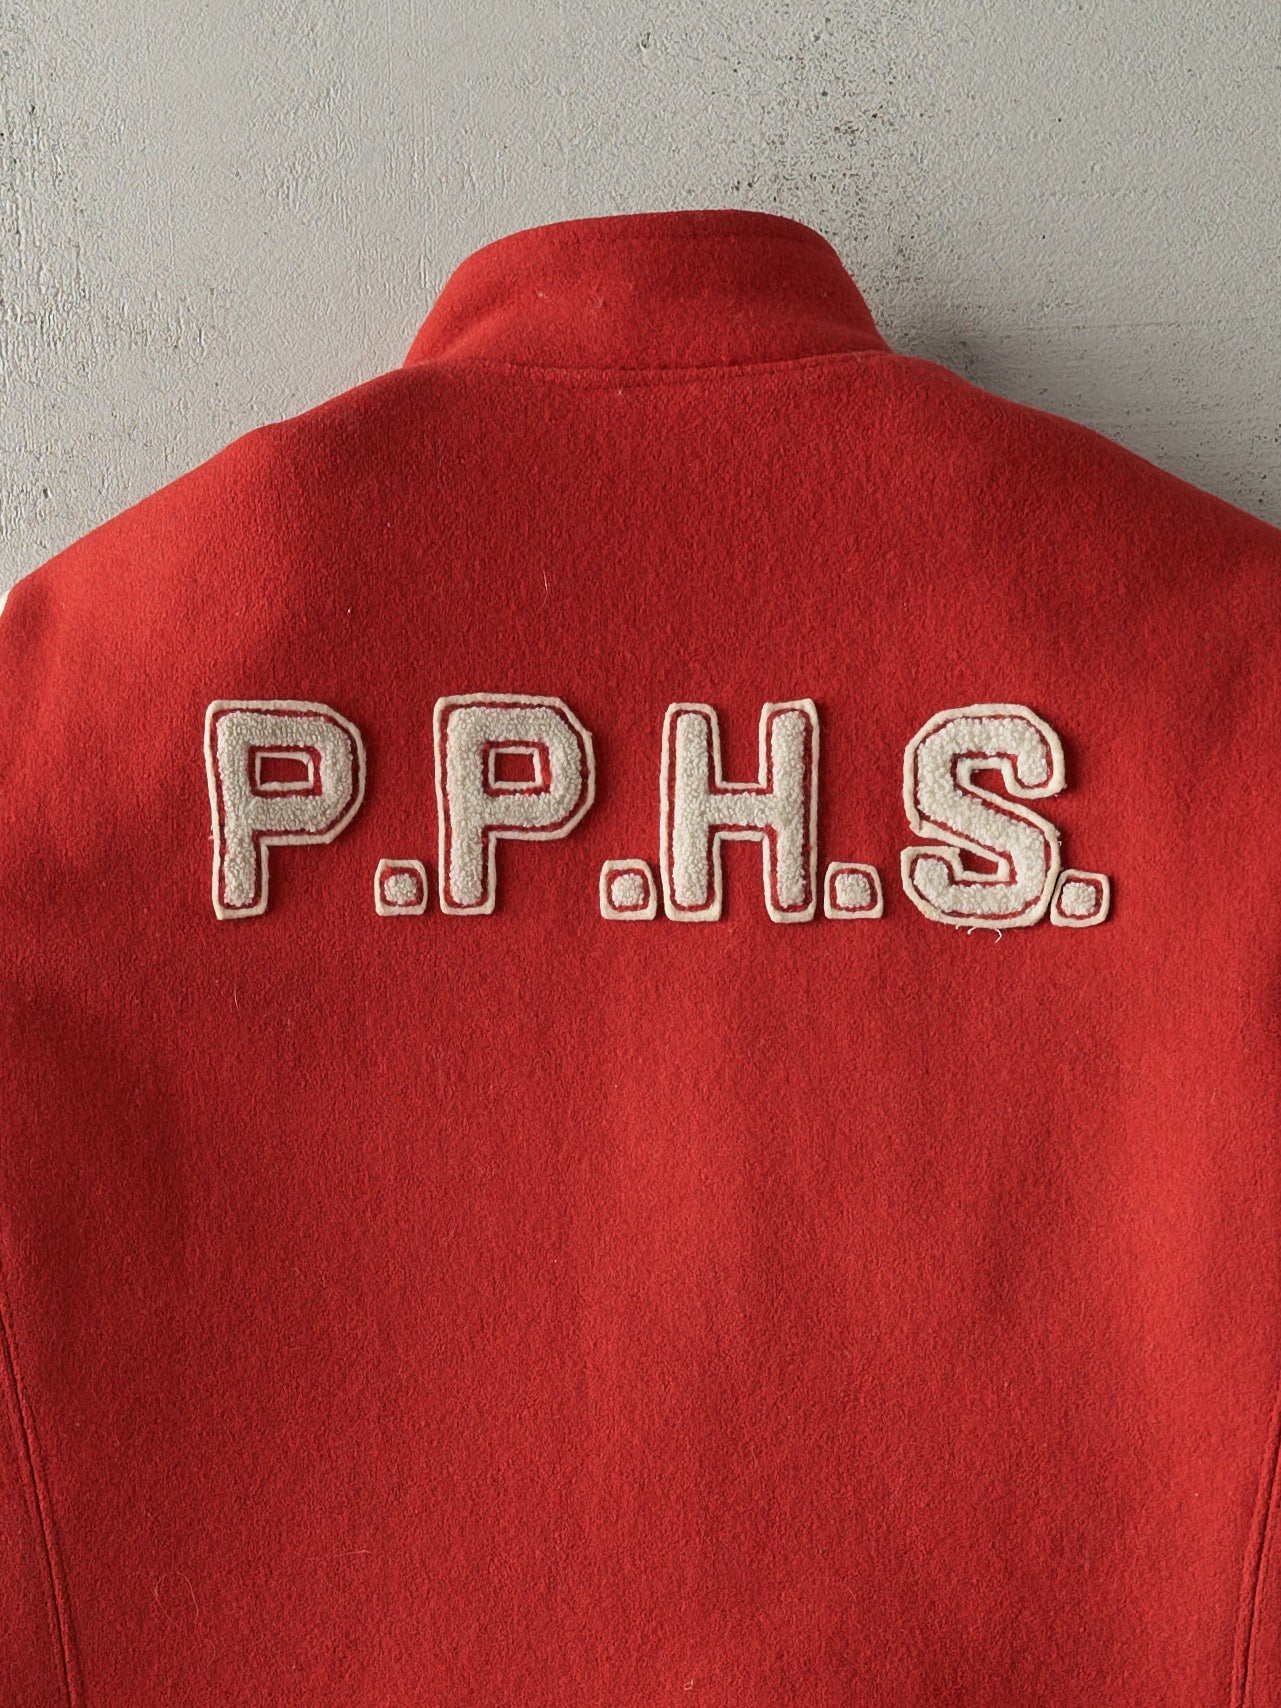 Vintage 90s Red & White Port Perry Varsity Jacket (XS)